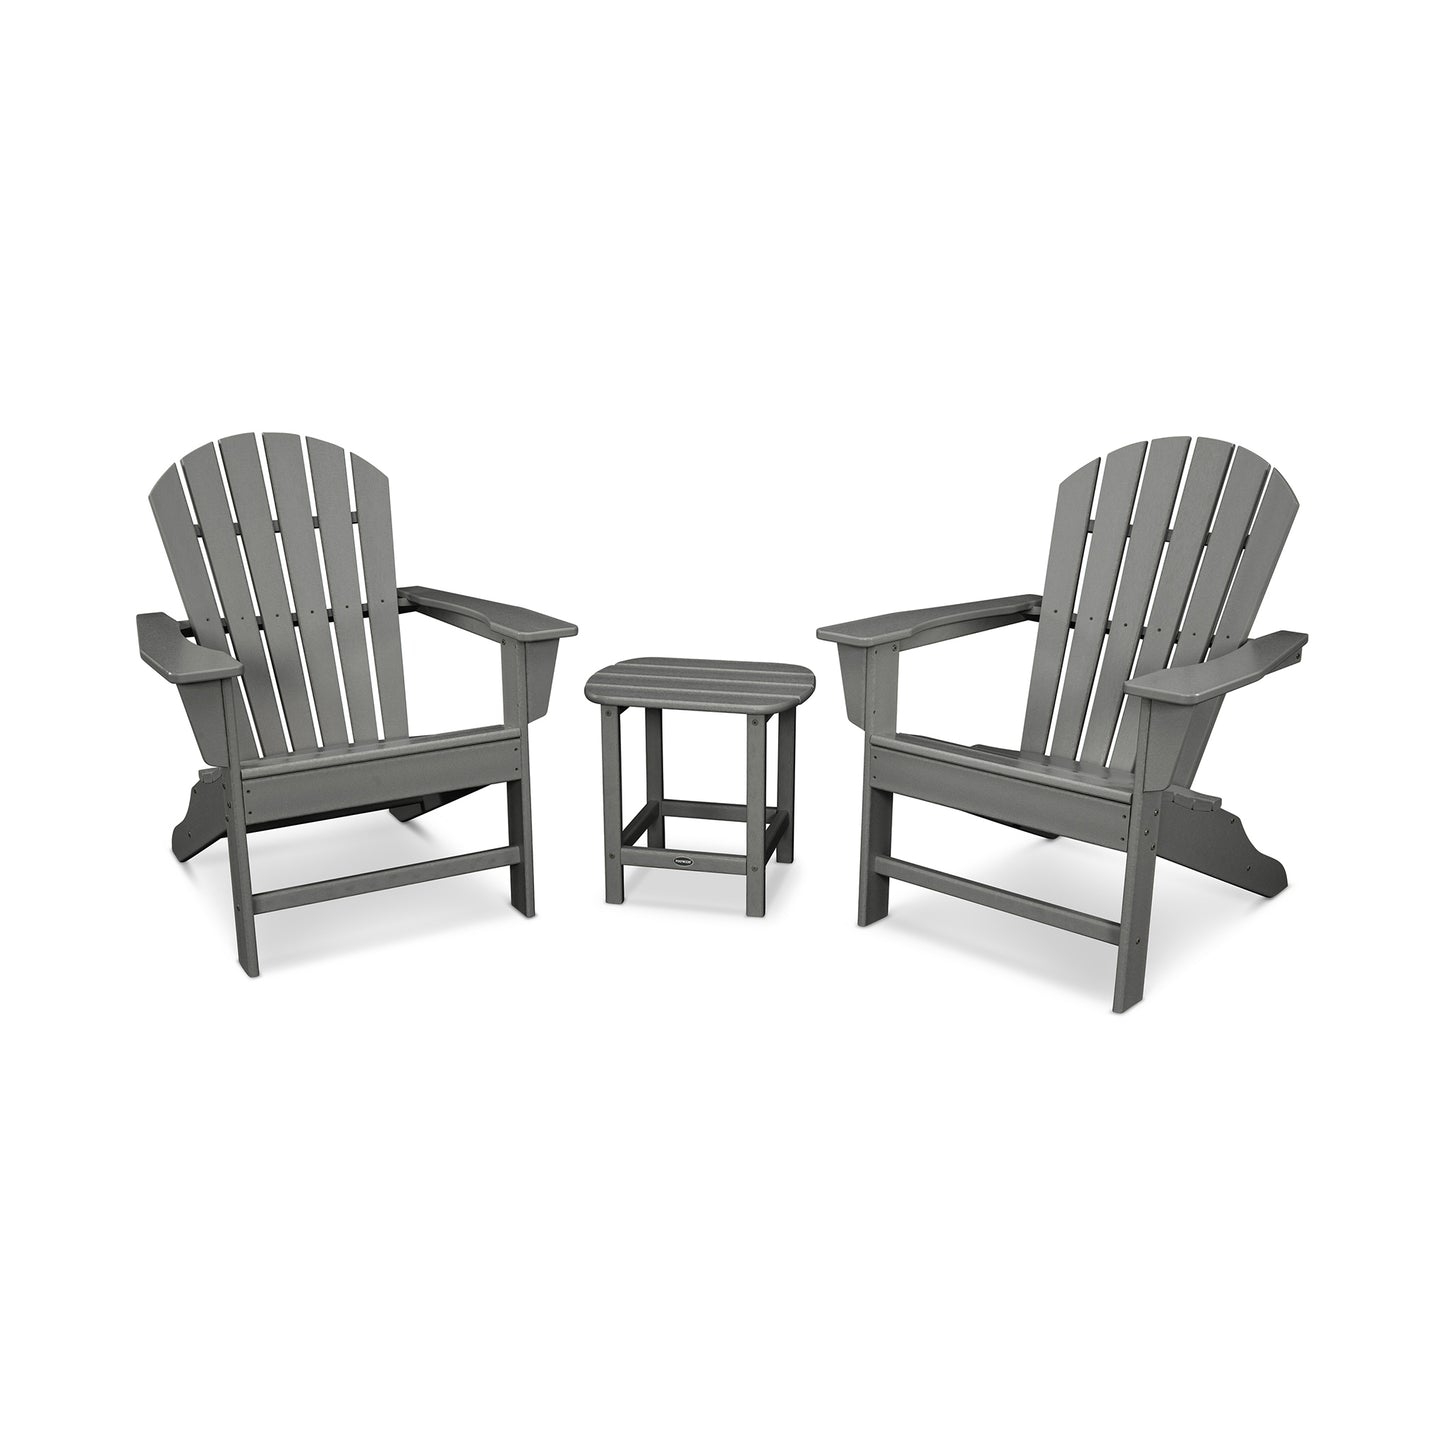 Two gray POLYWOOD South Beach Adirondack chairs facing each other with a small matching table in between, set against a plain white background.